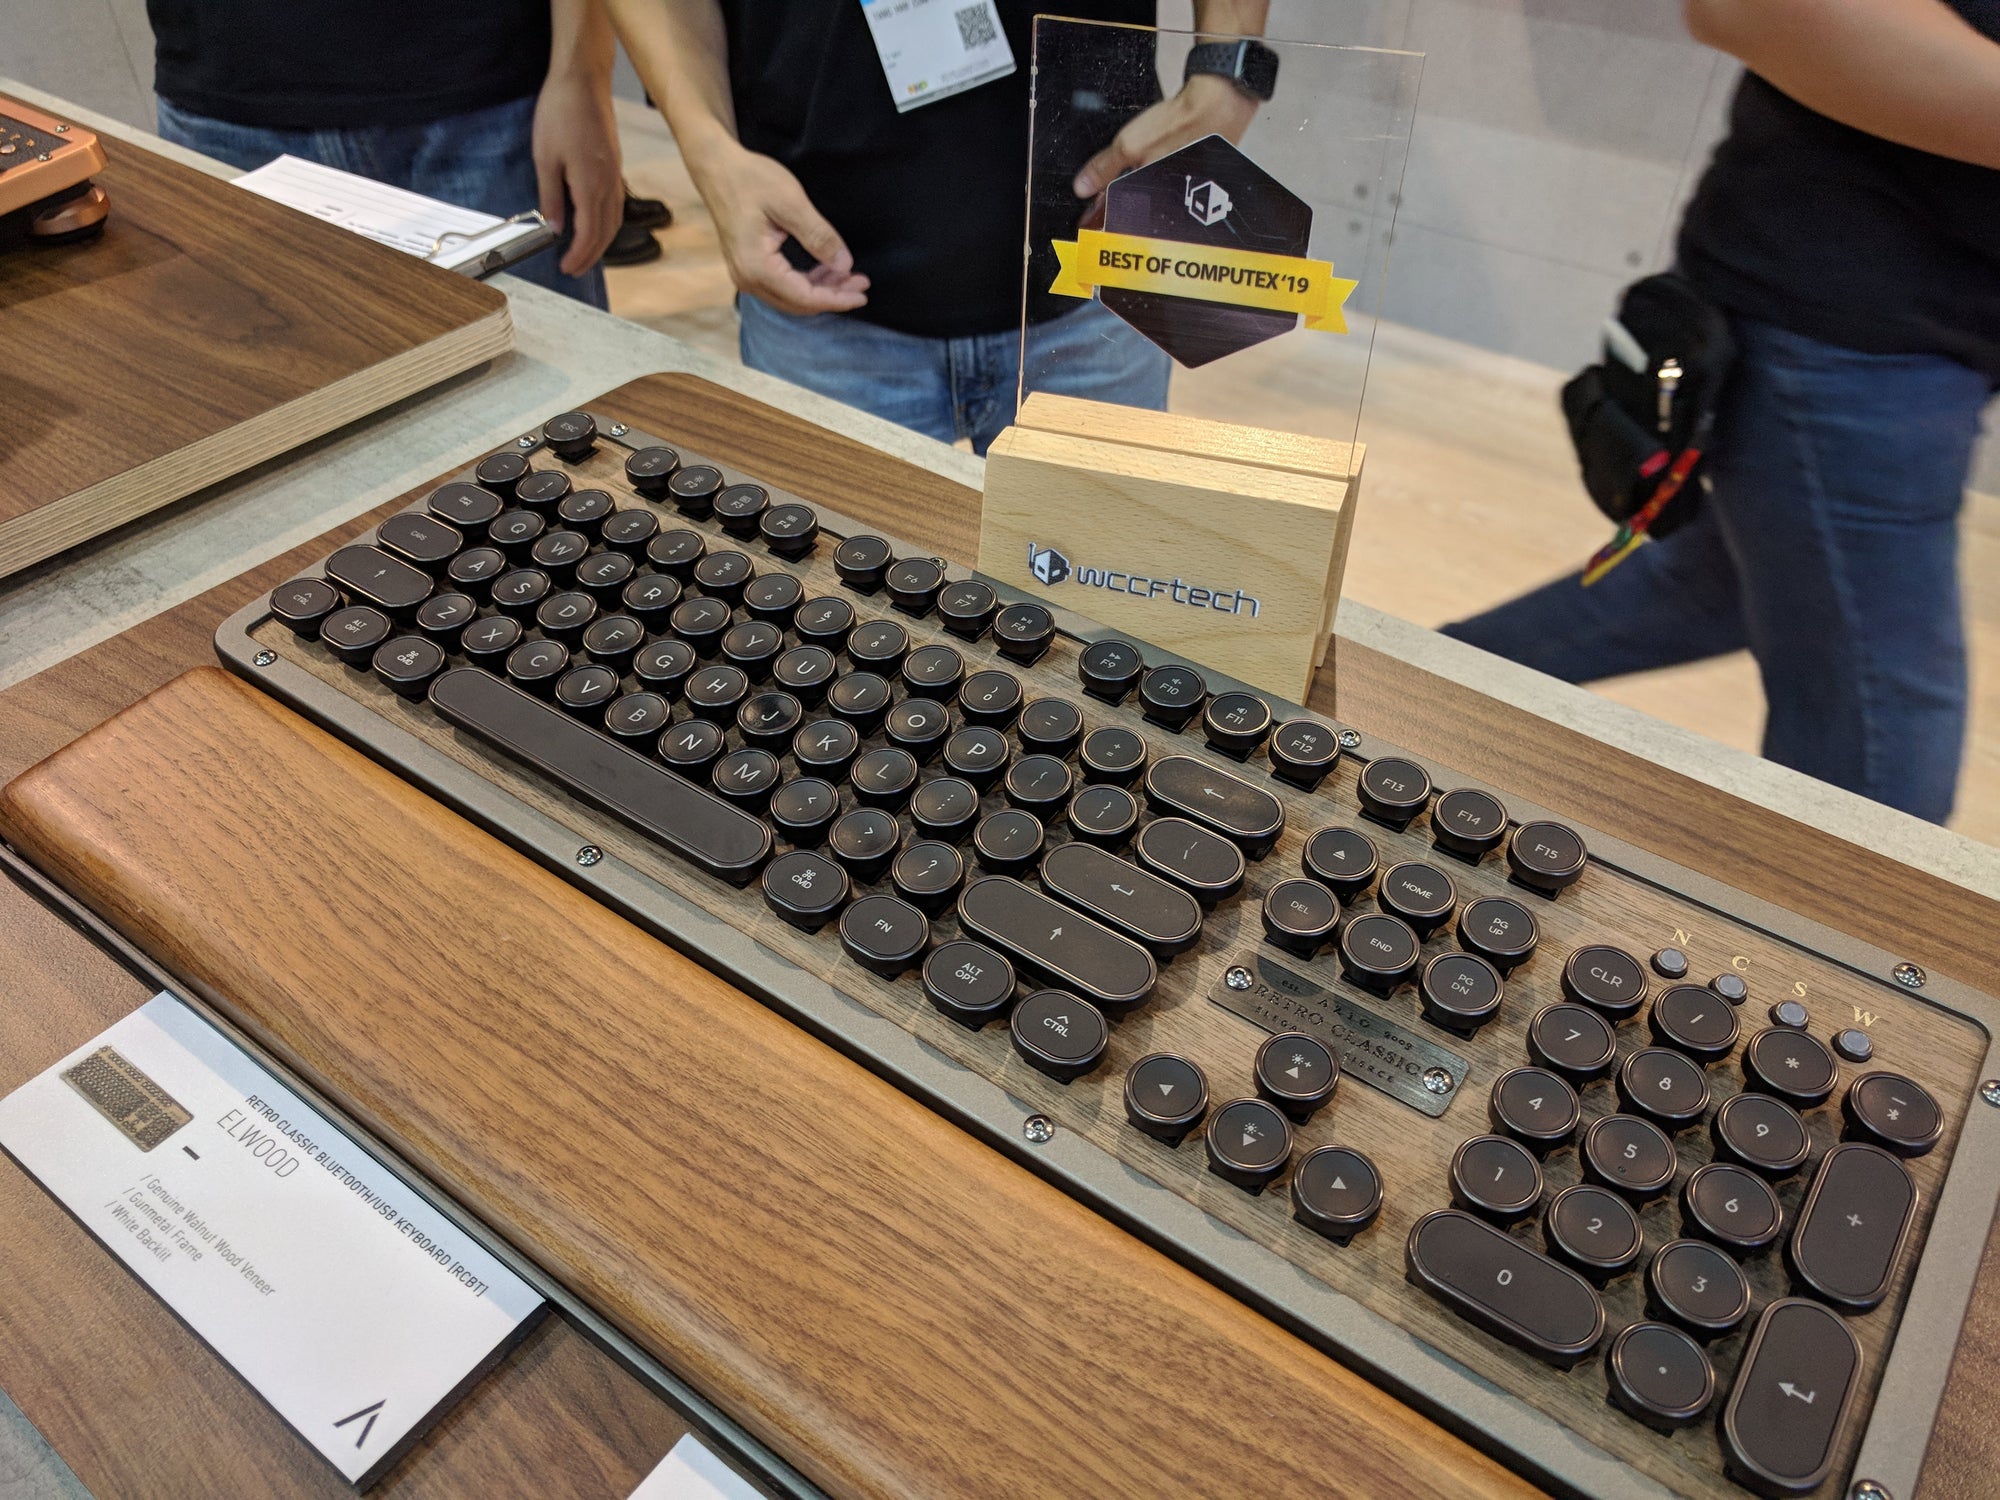 WCCFTECH: Wccftech’s Best of Computex 2019: PC Hardware & Technology Awards